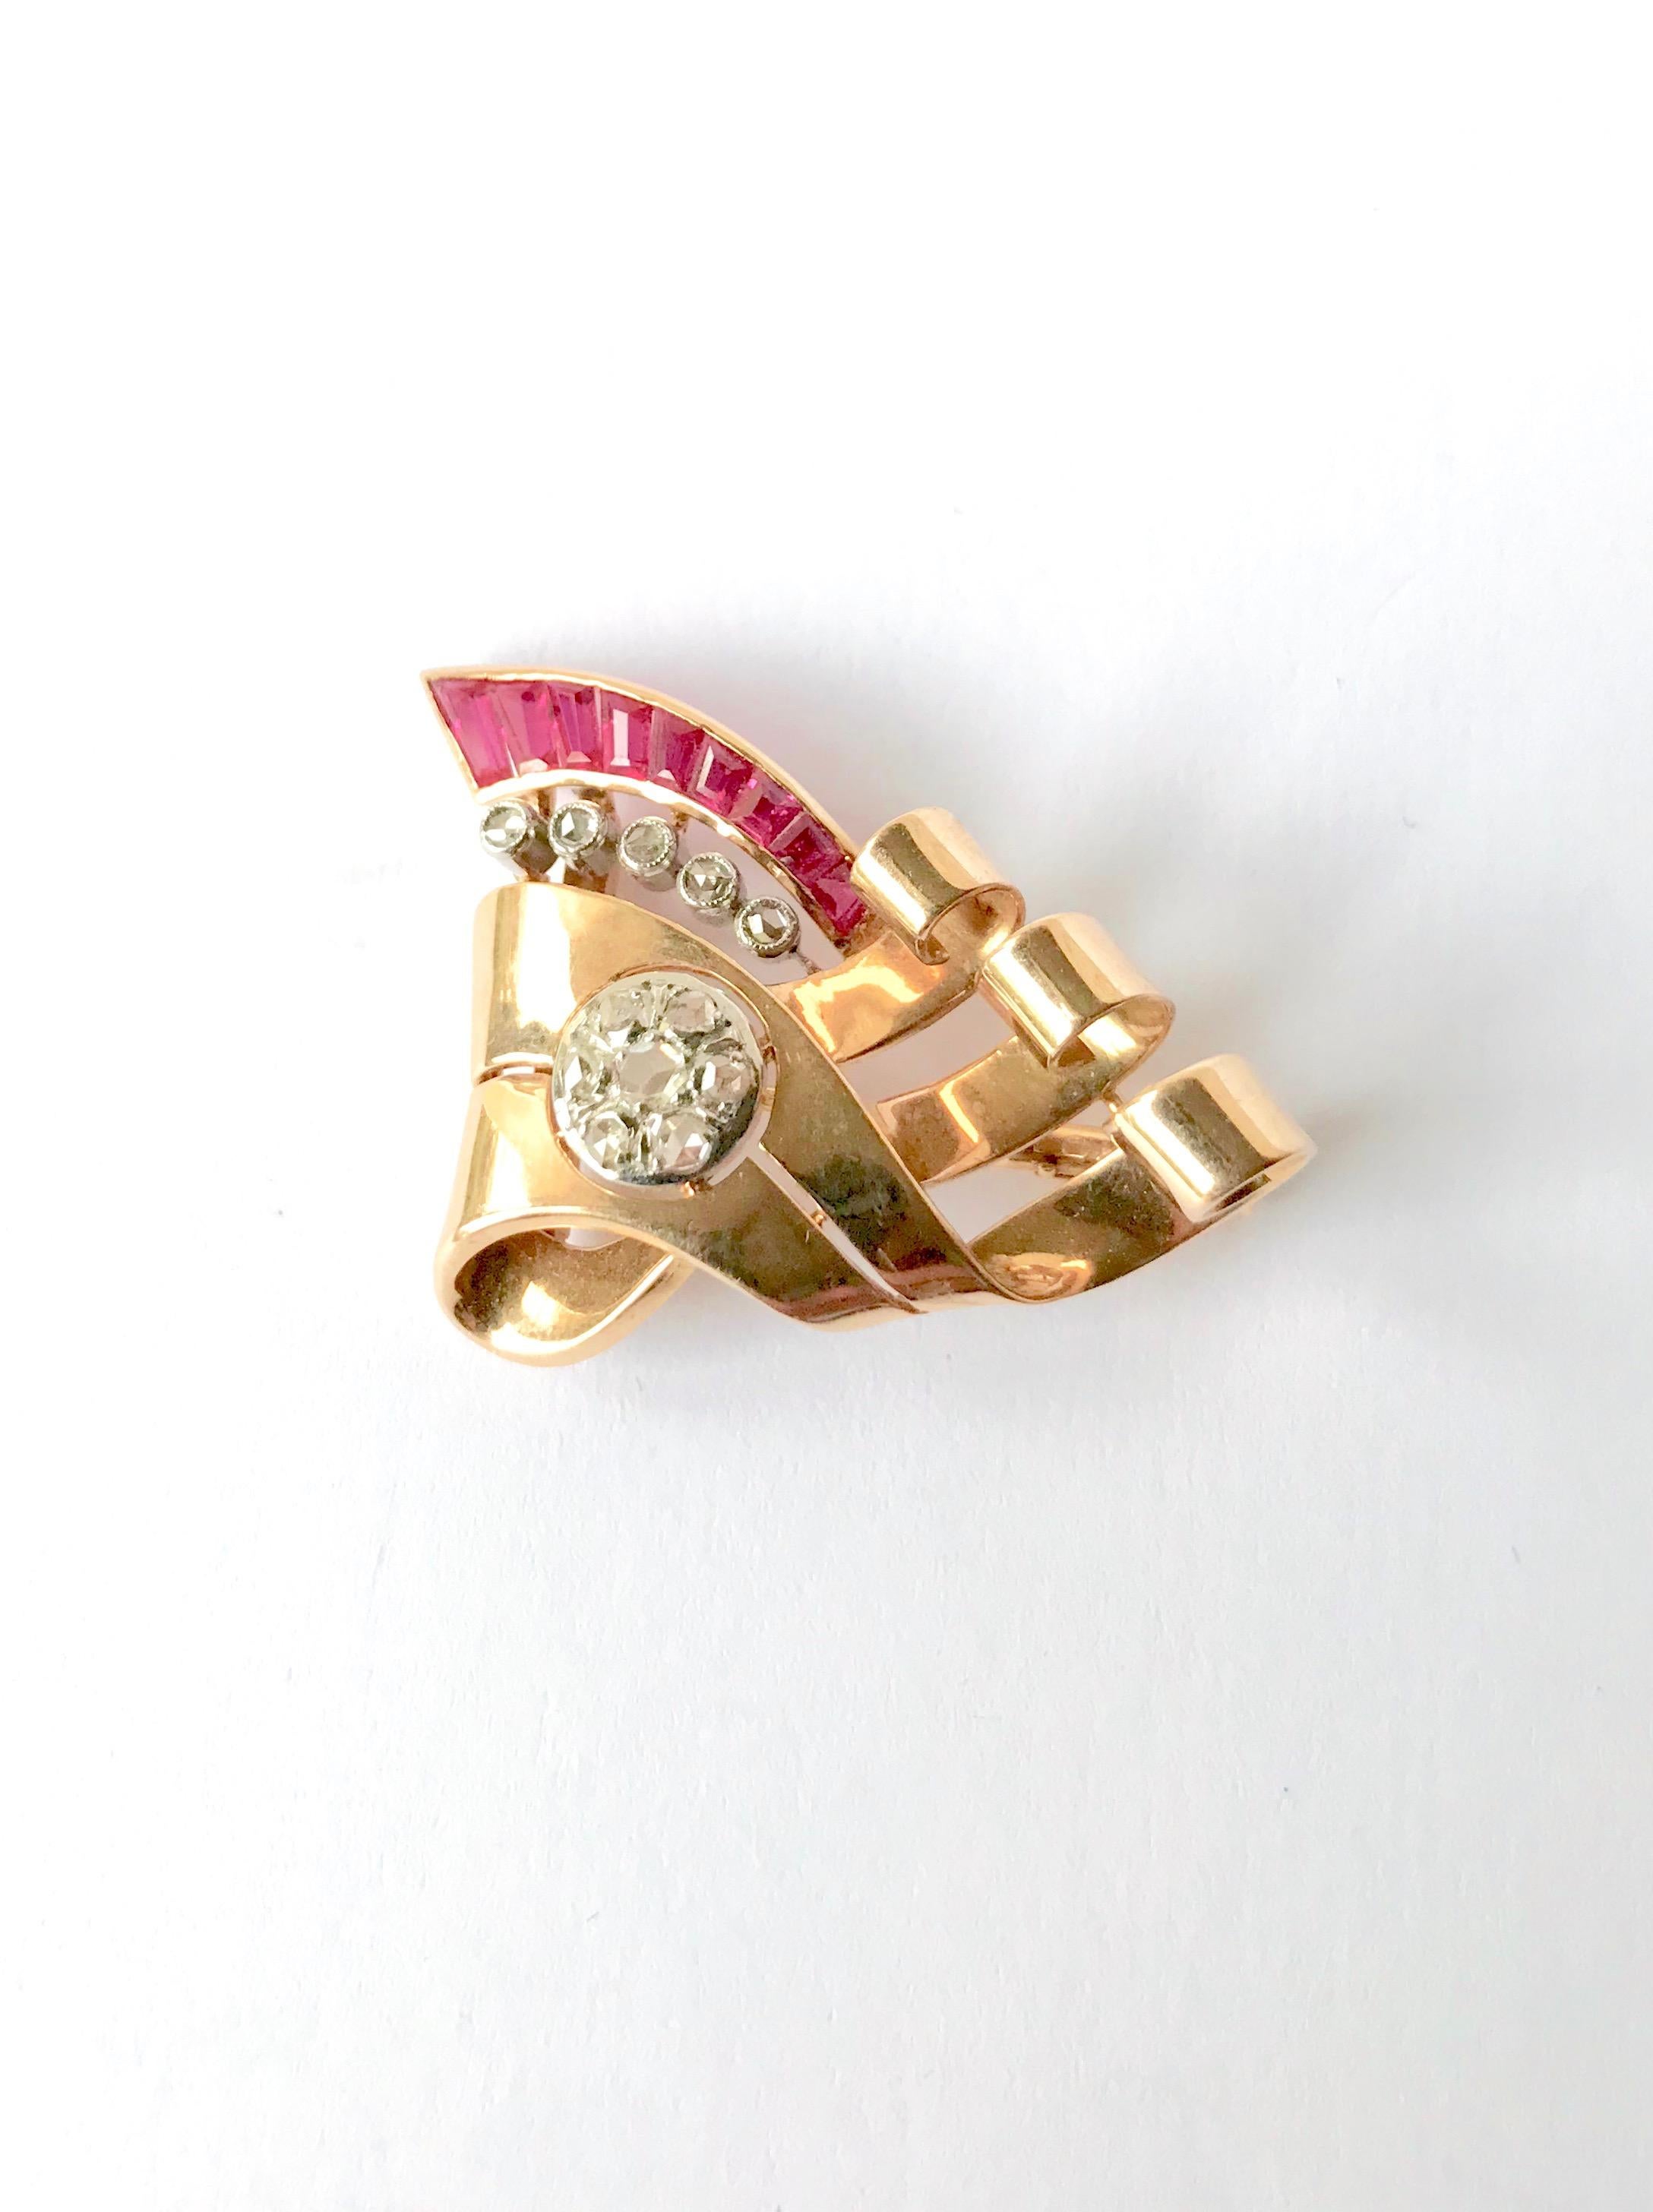 Women's or Men's Brooch circa 1940 in 18 Kt gold, rubies diamonds For Sale